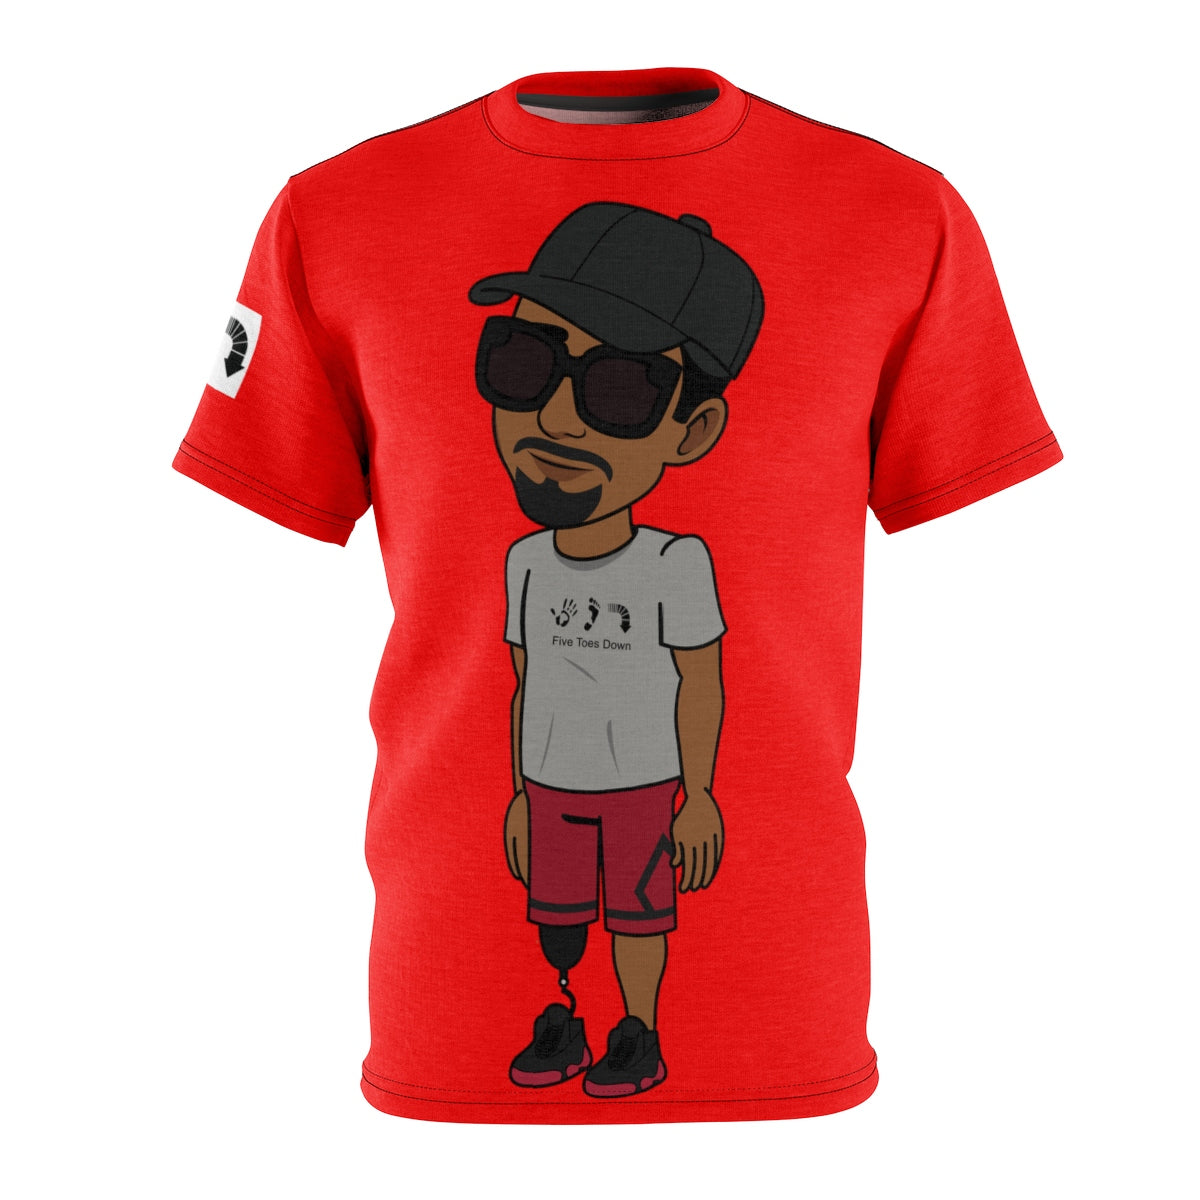 Five Toes Down Henry Unisex Cut & Sew Tee Red